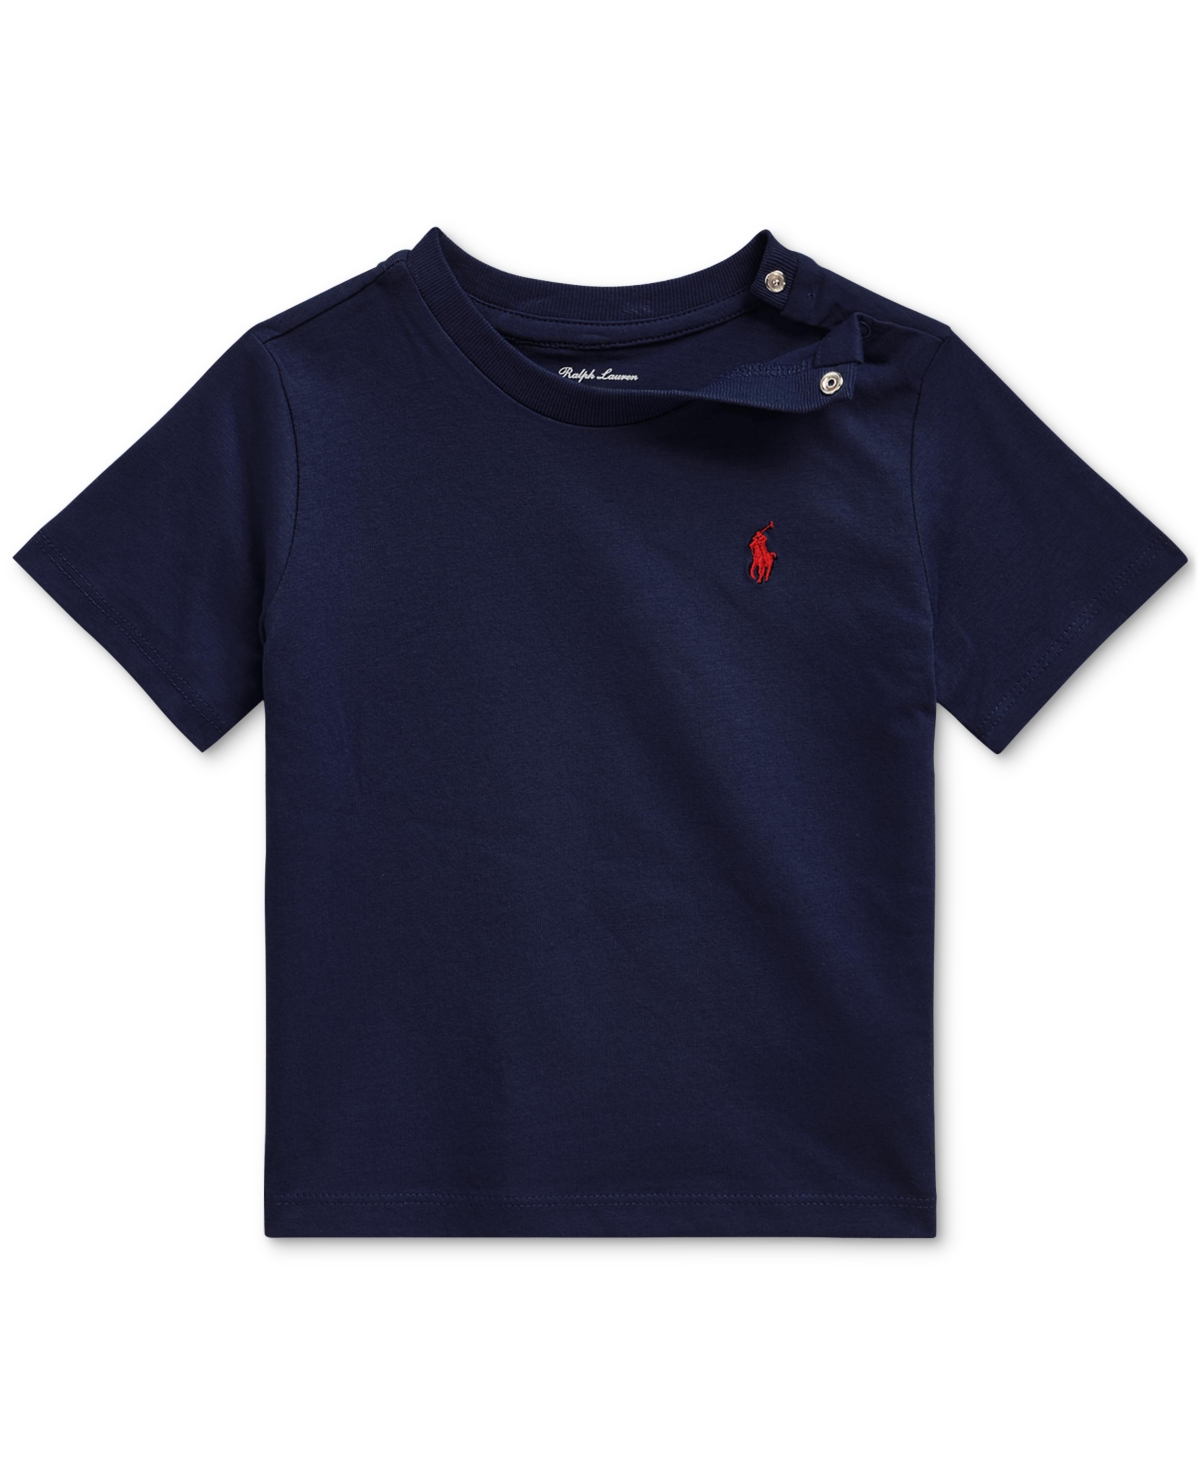 Polo Ralph Lauren Baby Boys Cotton Crewneck Embroidered Pony T-shirt In Navy